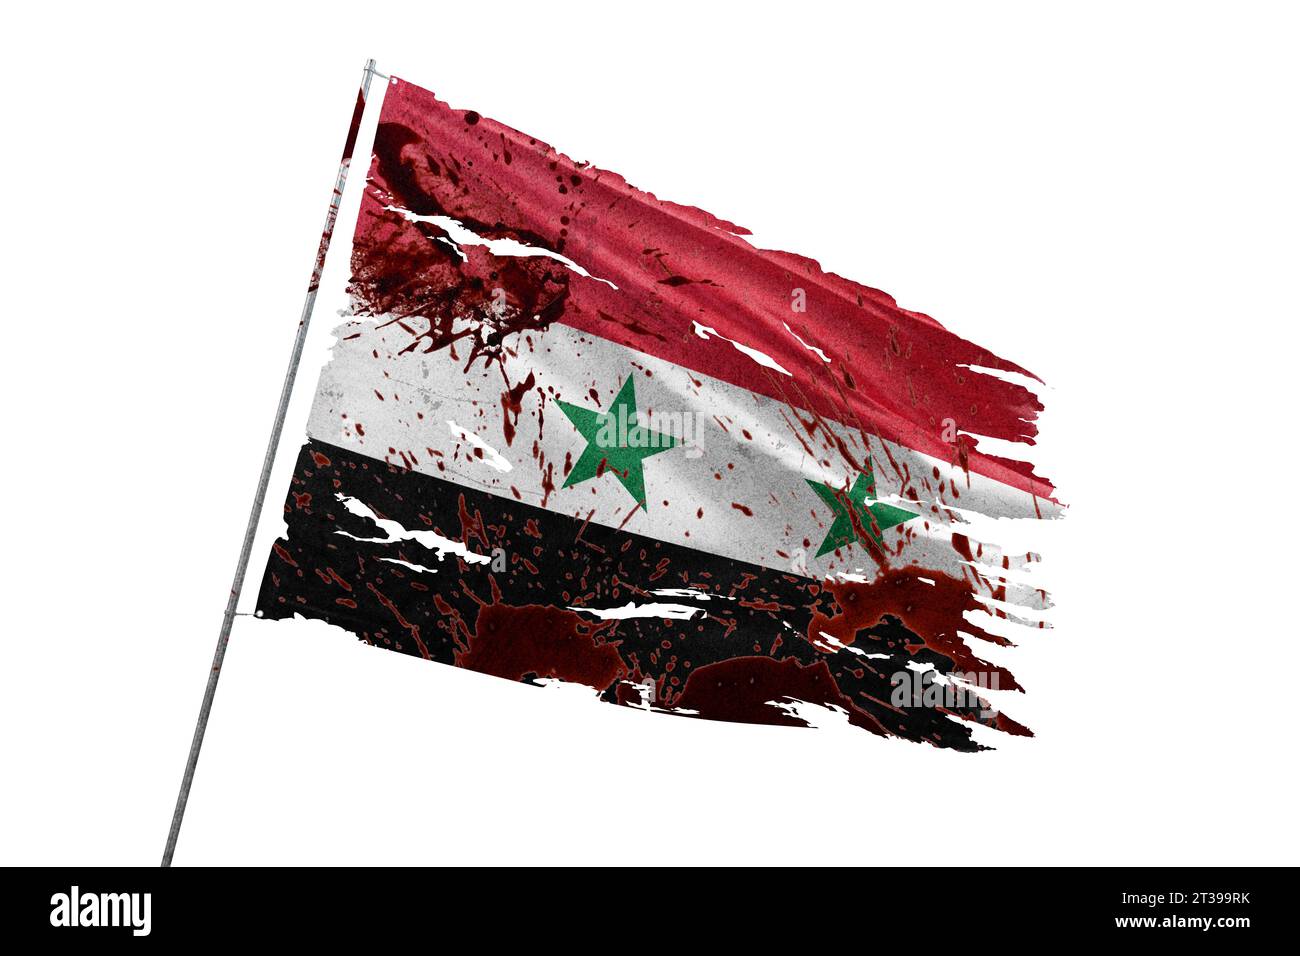 Syria Flag American Flag Ripped - Gift for Syrian From Syria